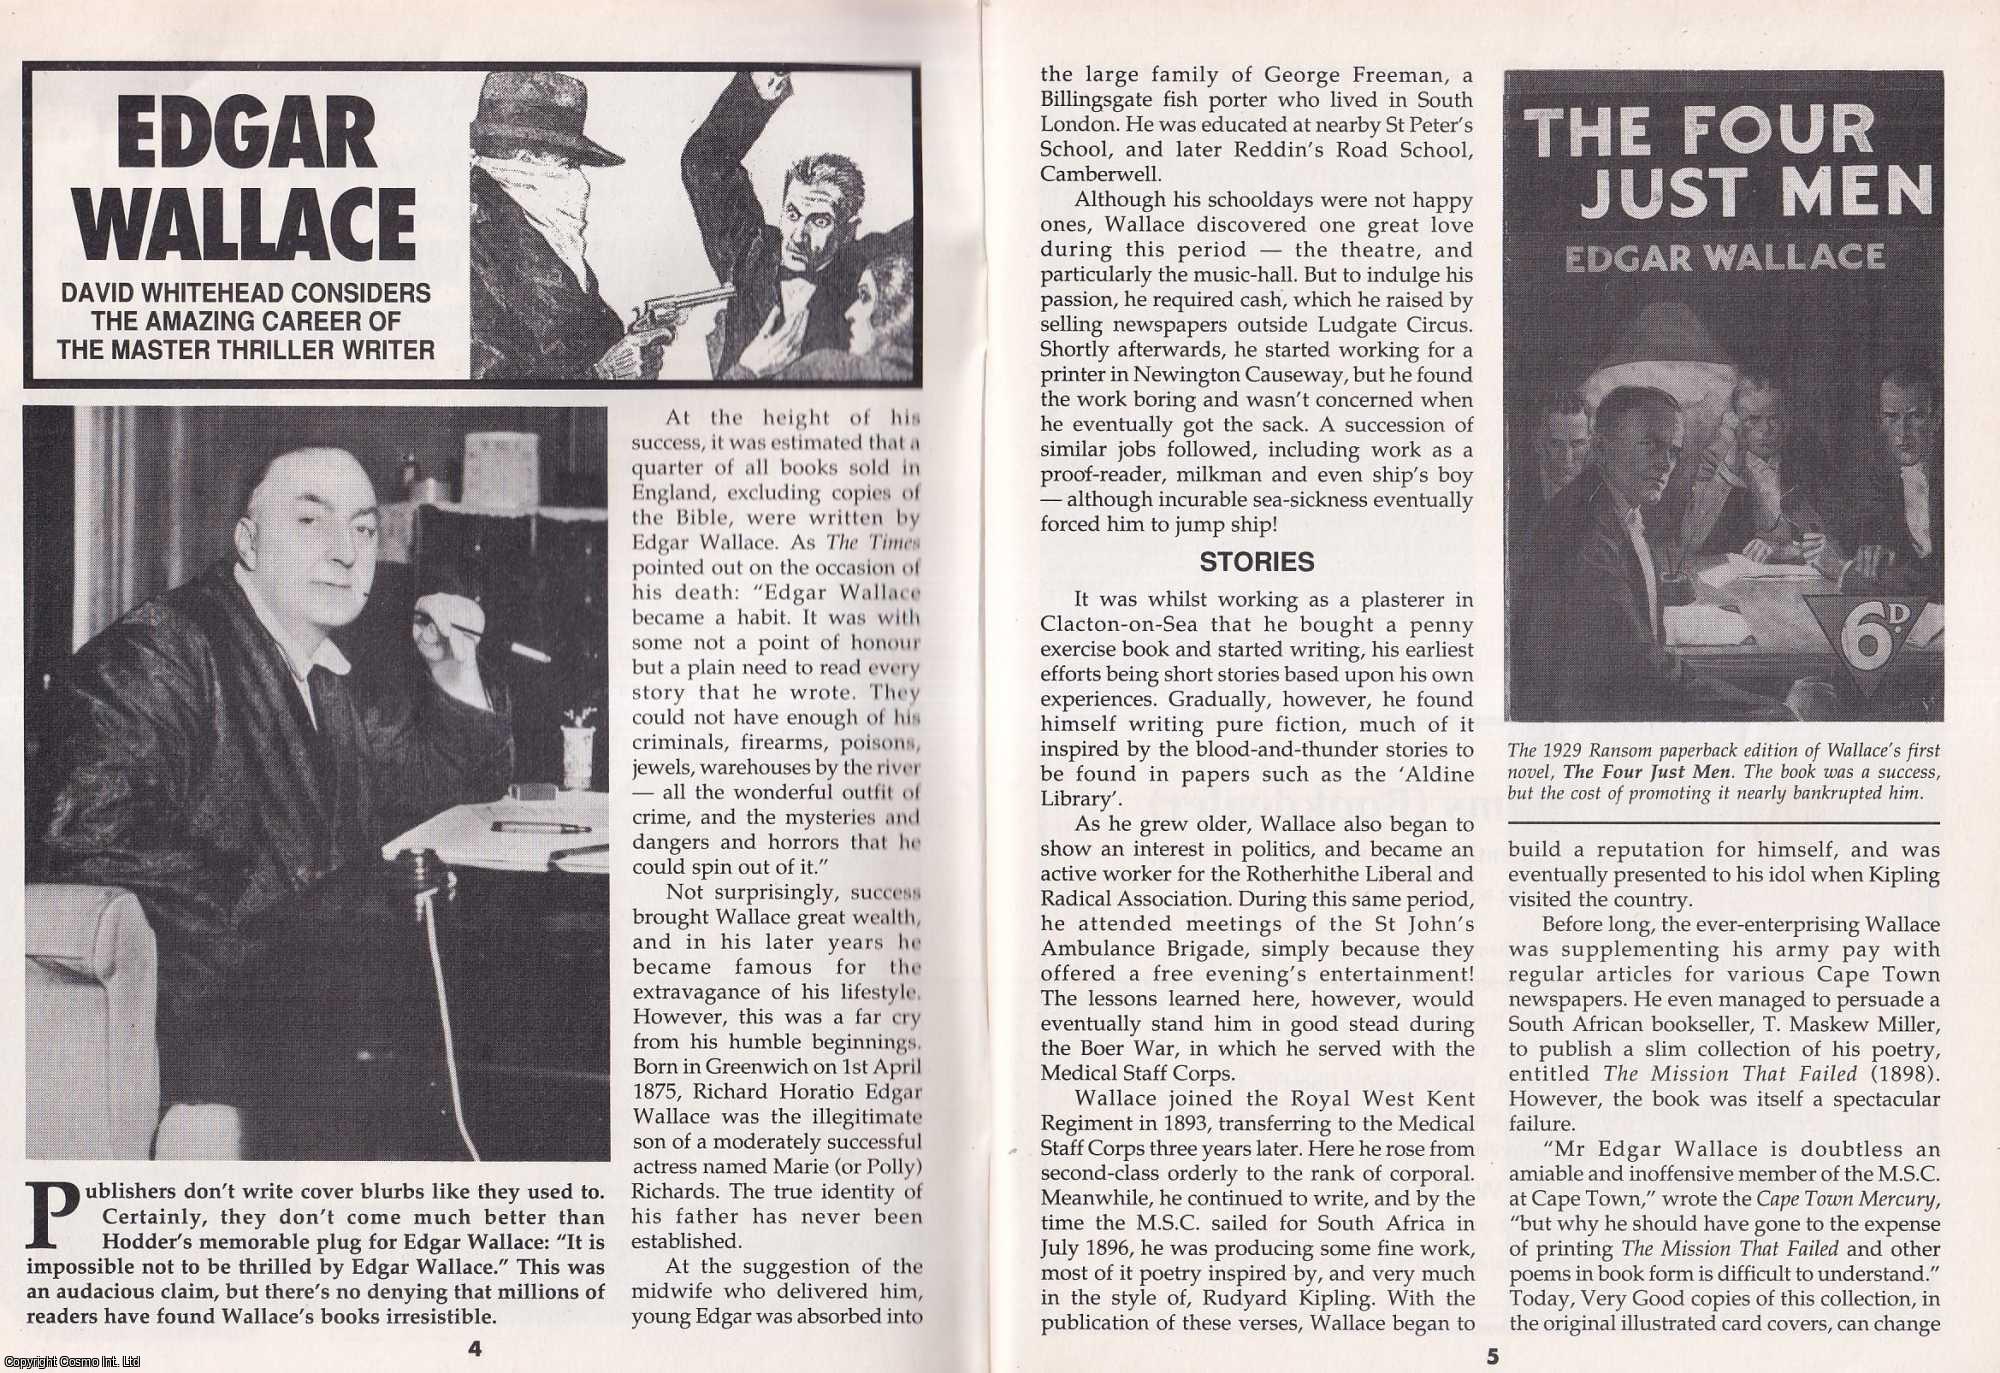 David Whitehead - Edgar Wallace. Considering The Amazing Career of The Master Thriller Writer. This is an original article separated from an issue of The Book & Magazine Collector publication.